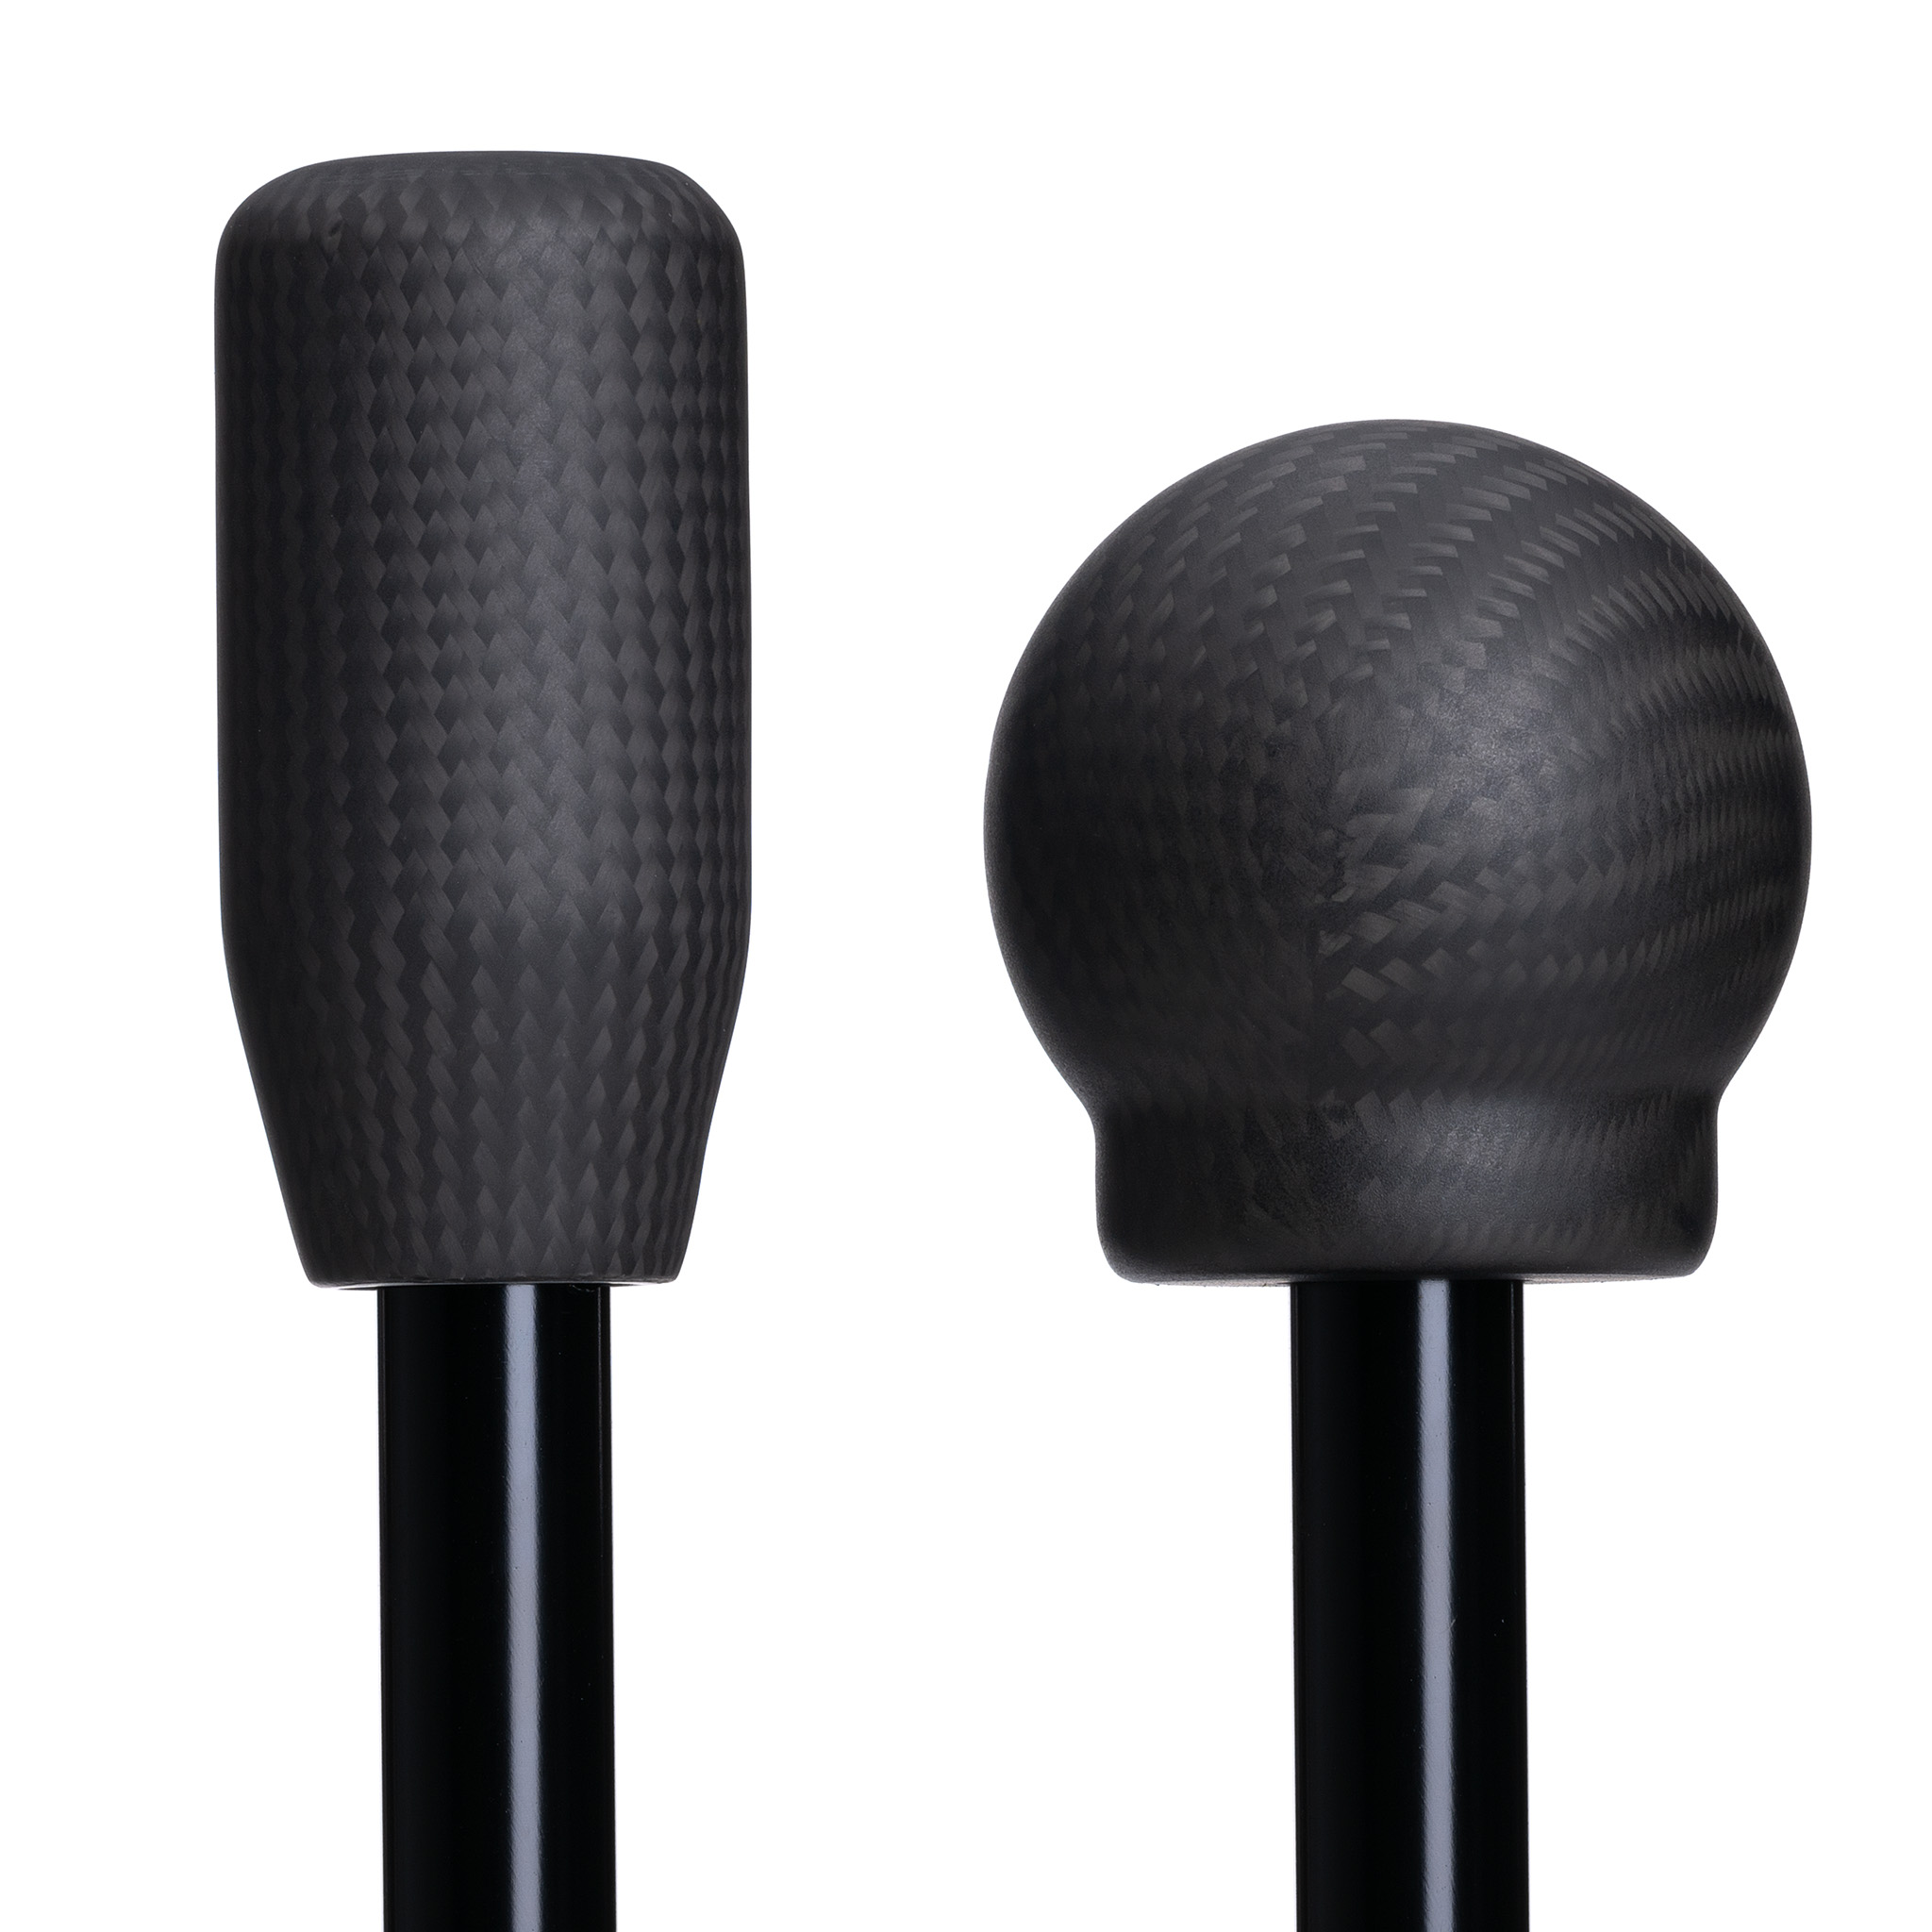 ClubSport Shifter Carbon Knobs Kit